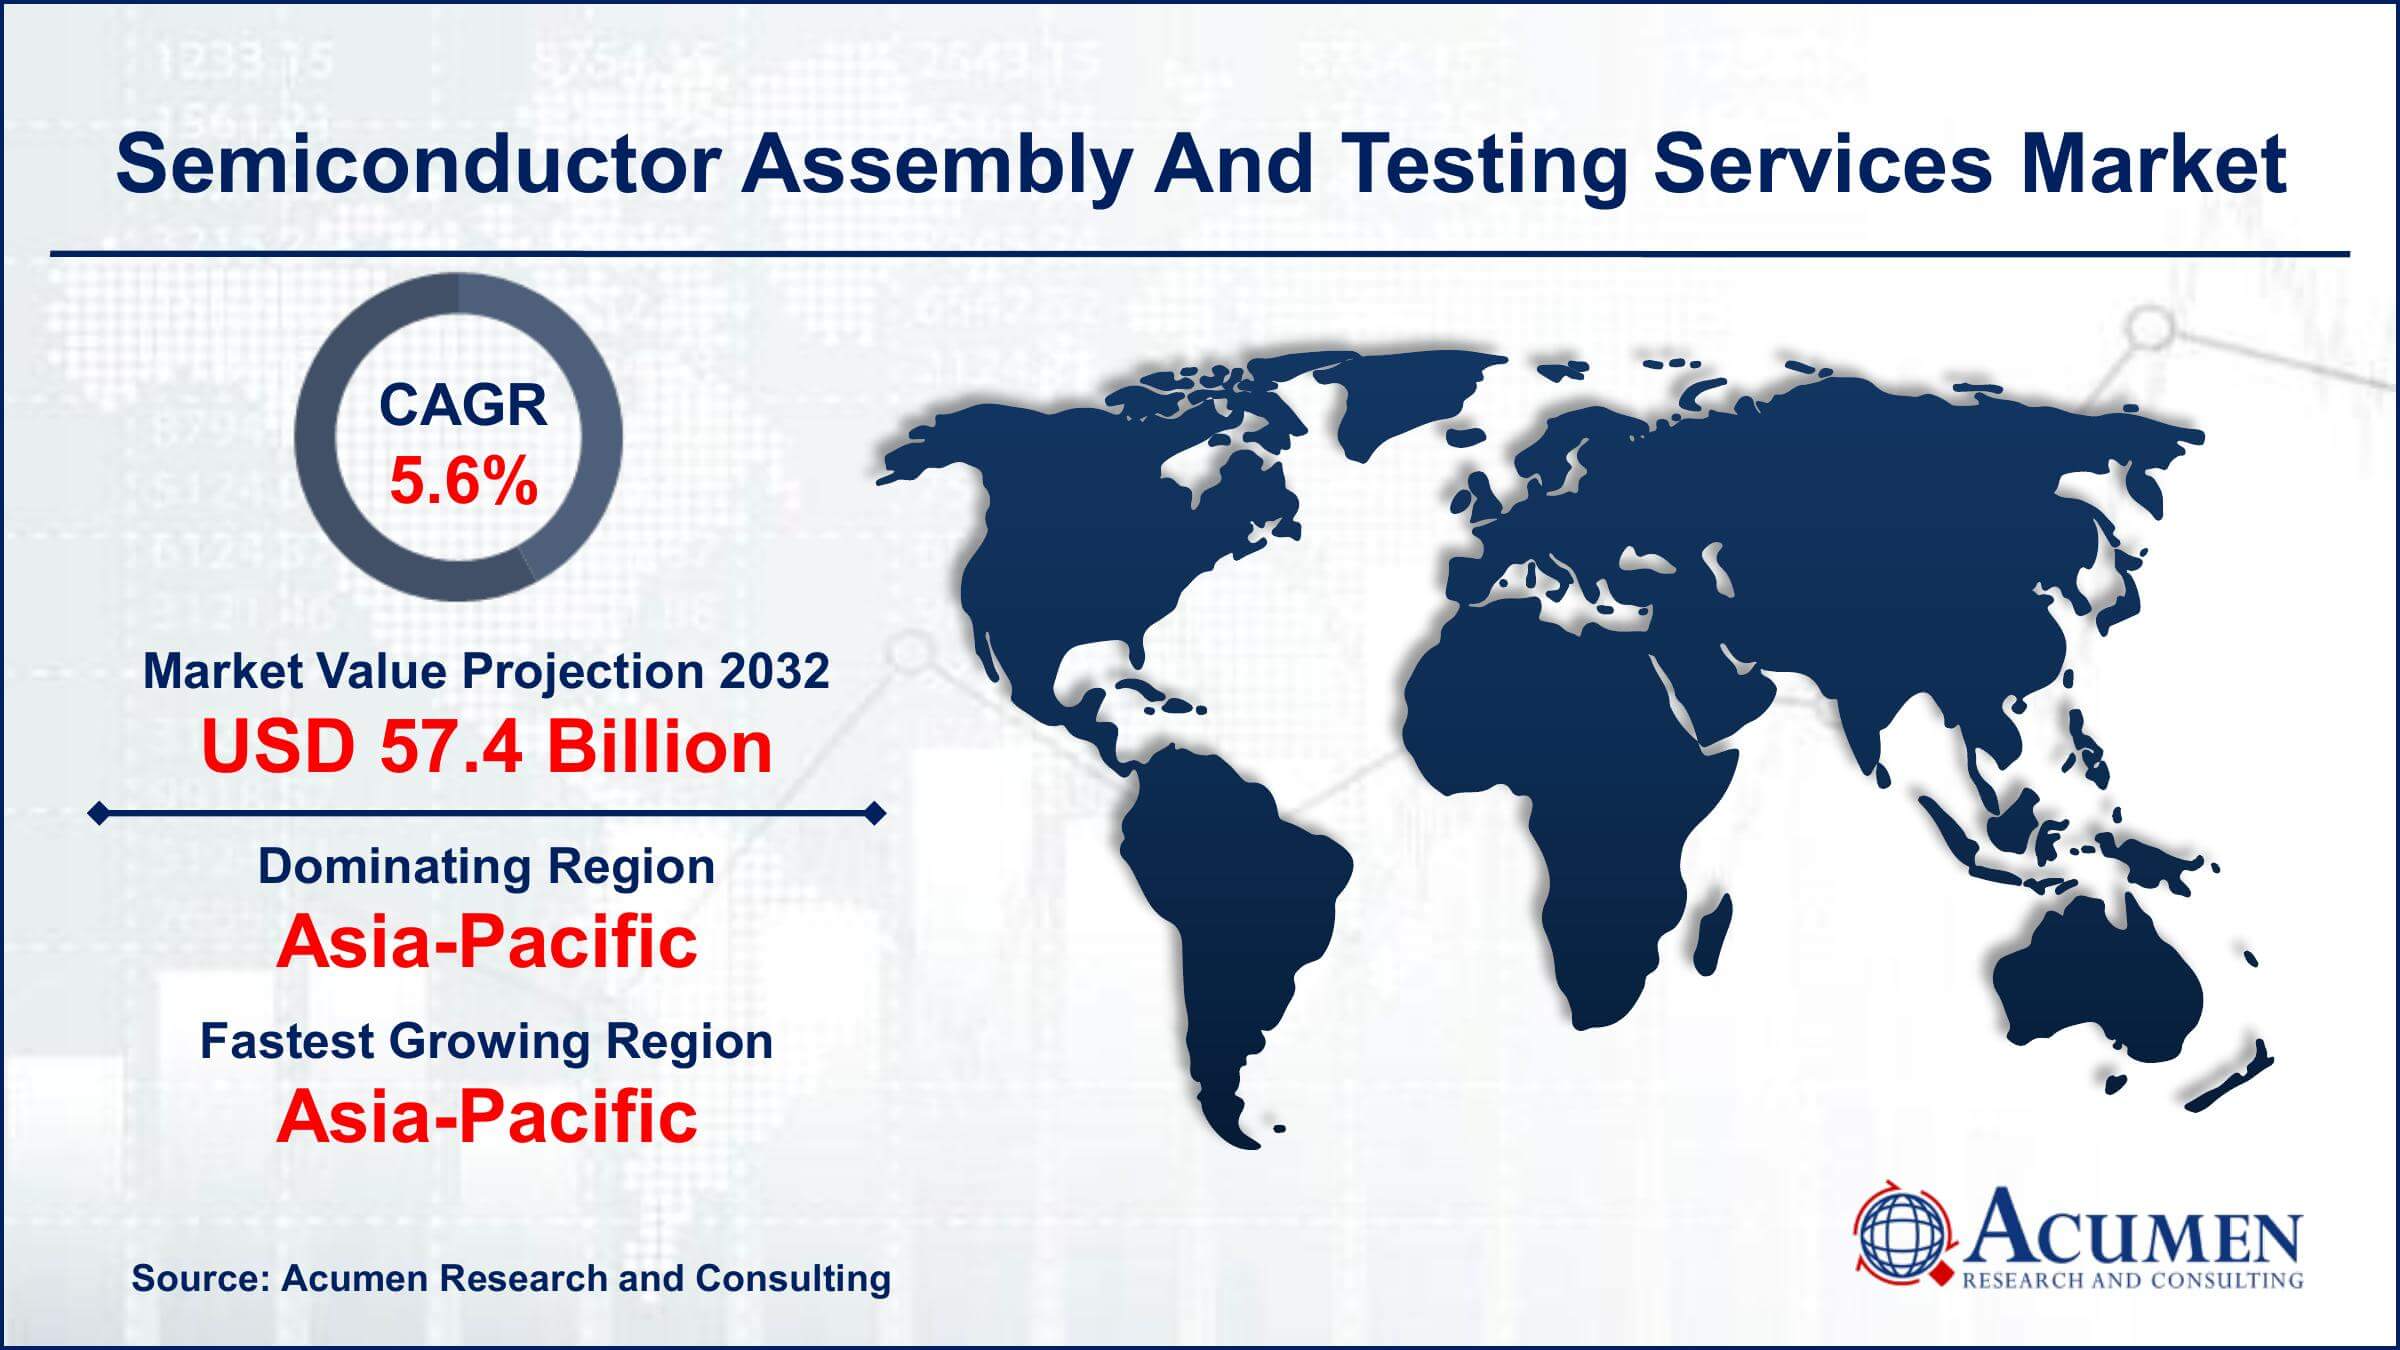 Global Semiconductor Assembly and Testing Services Market Trends